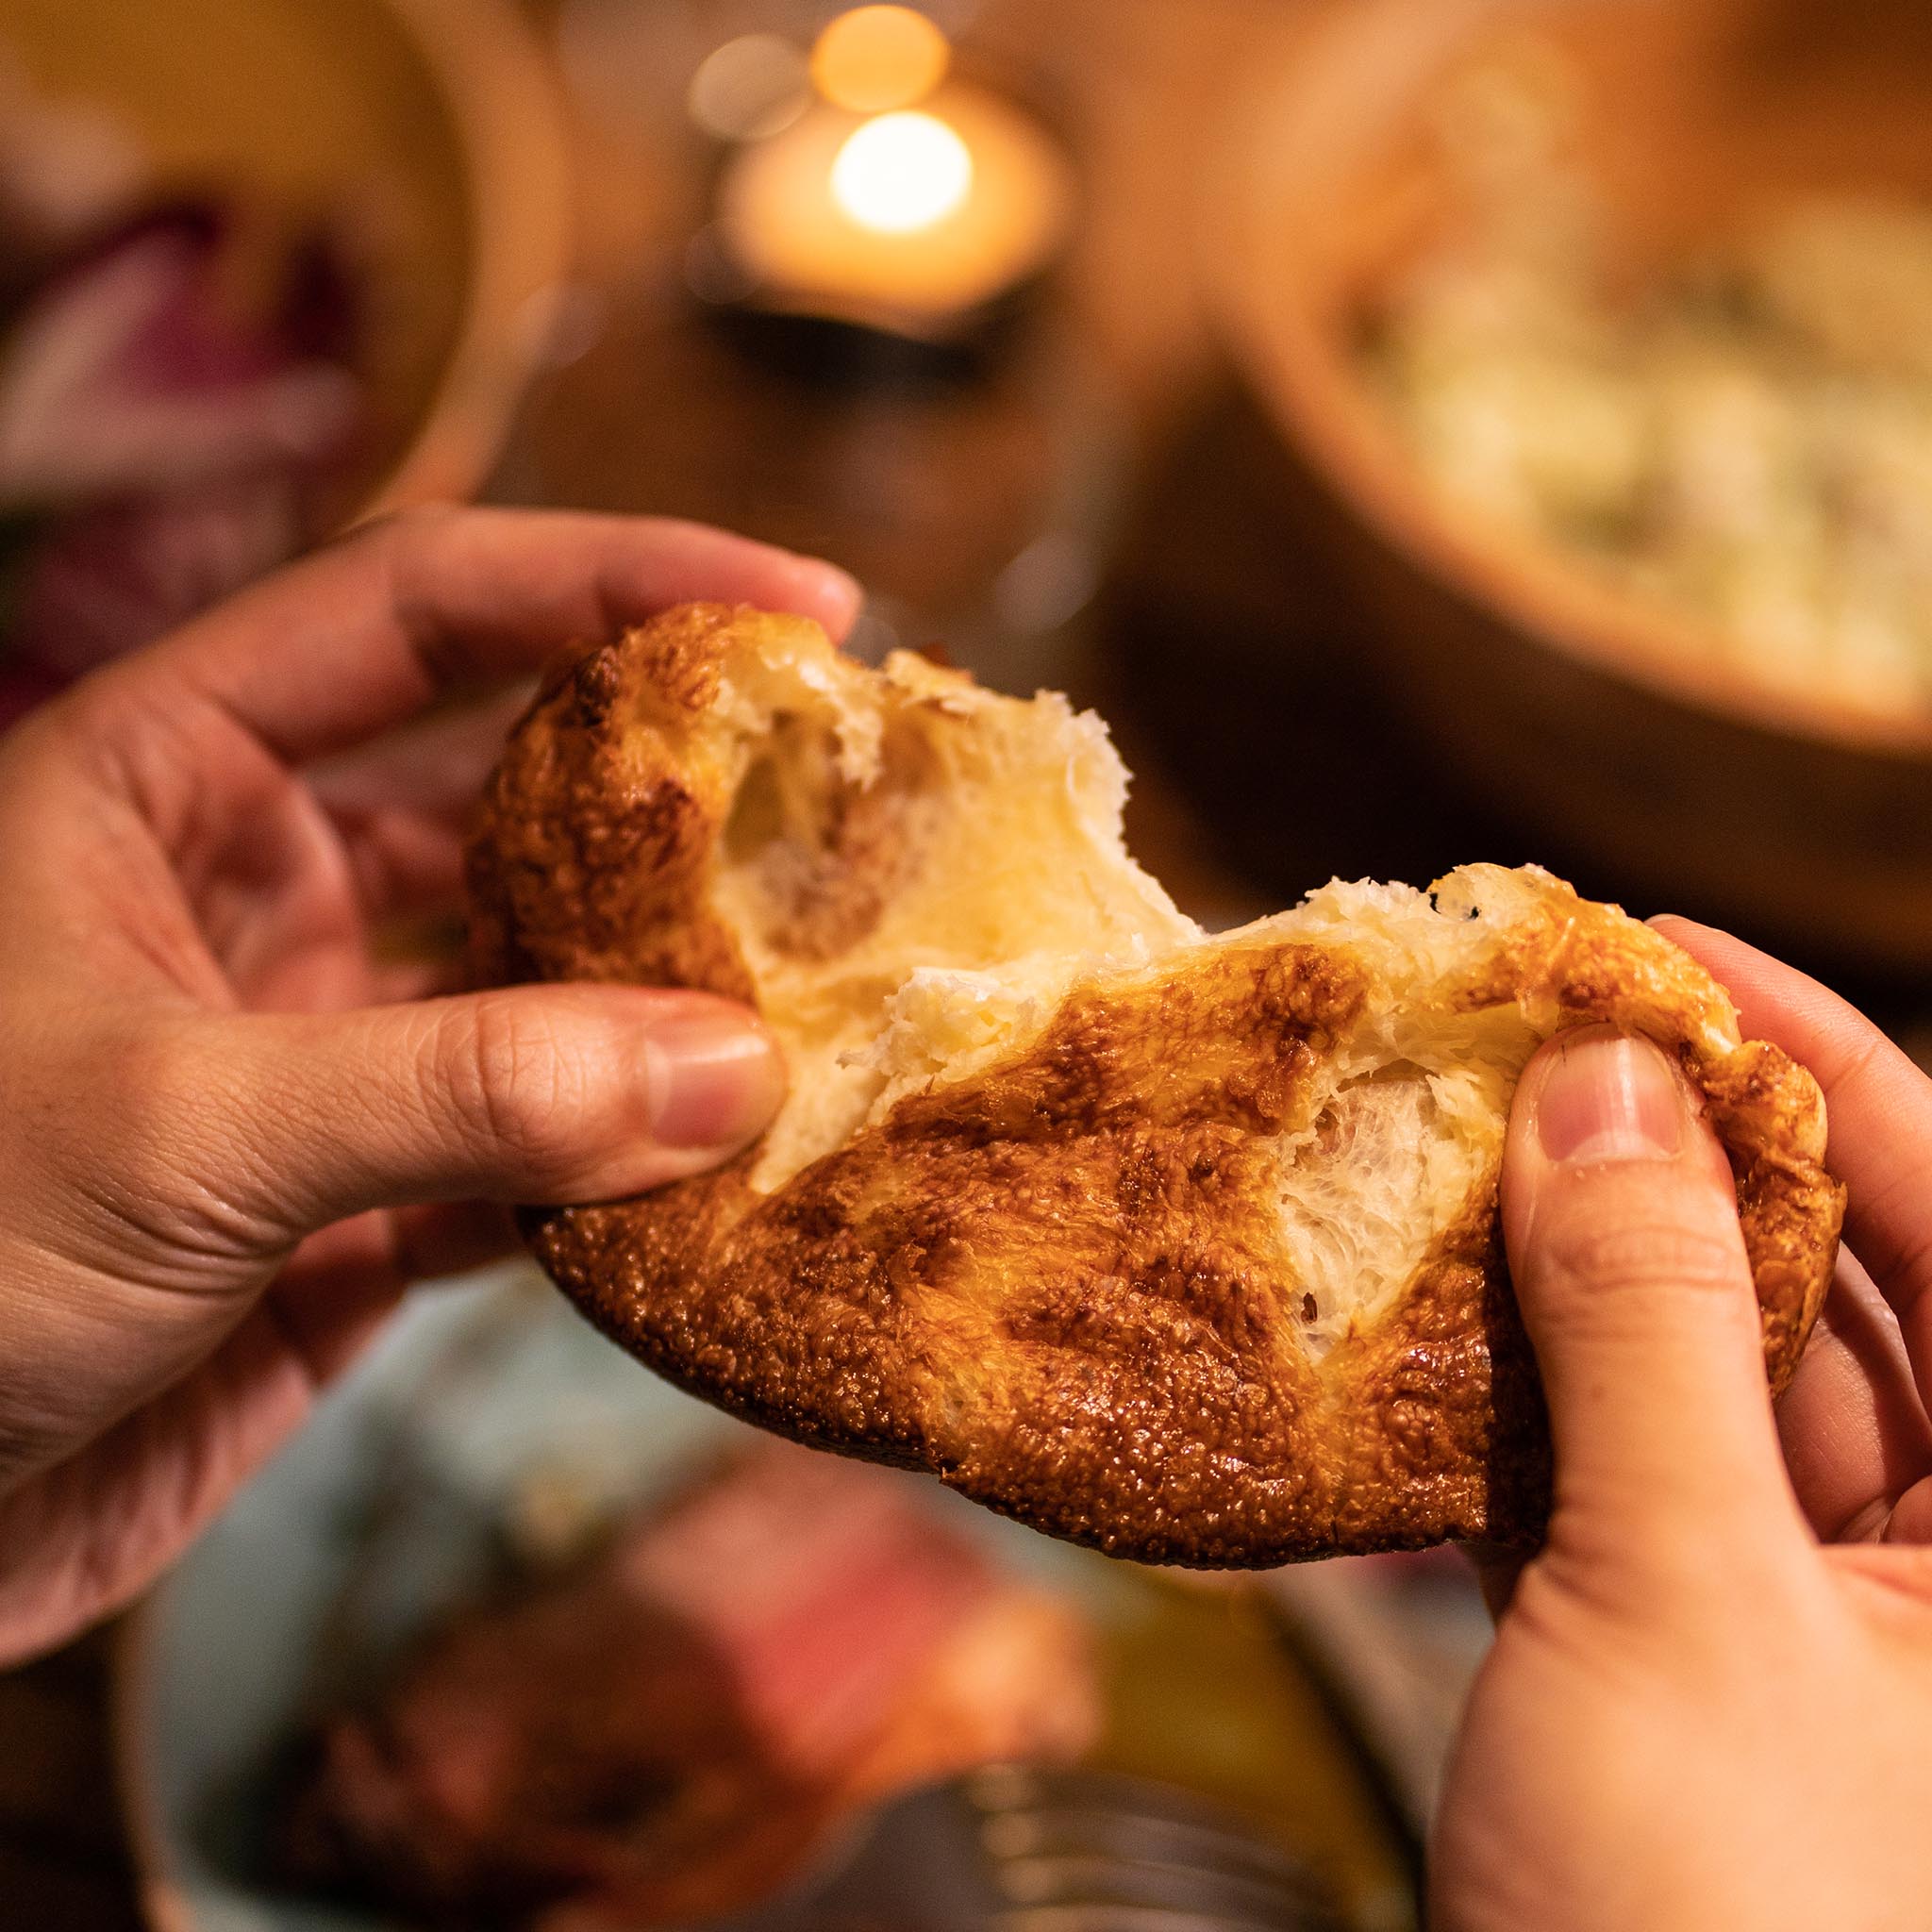 A yorkshire pudding being pulled apart by two hands.